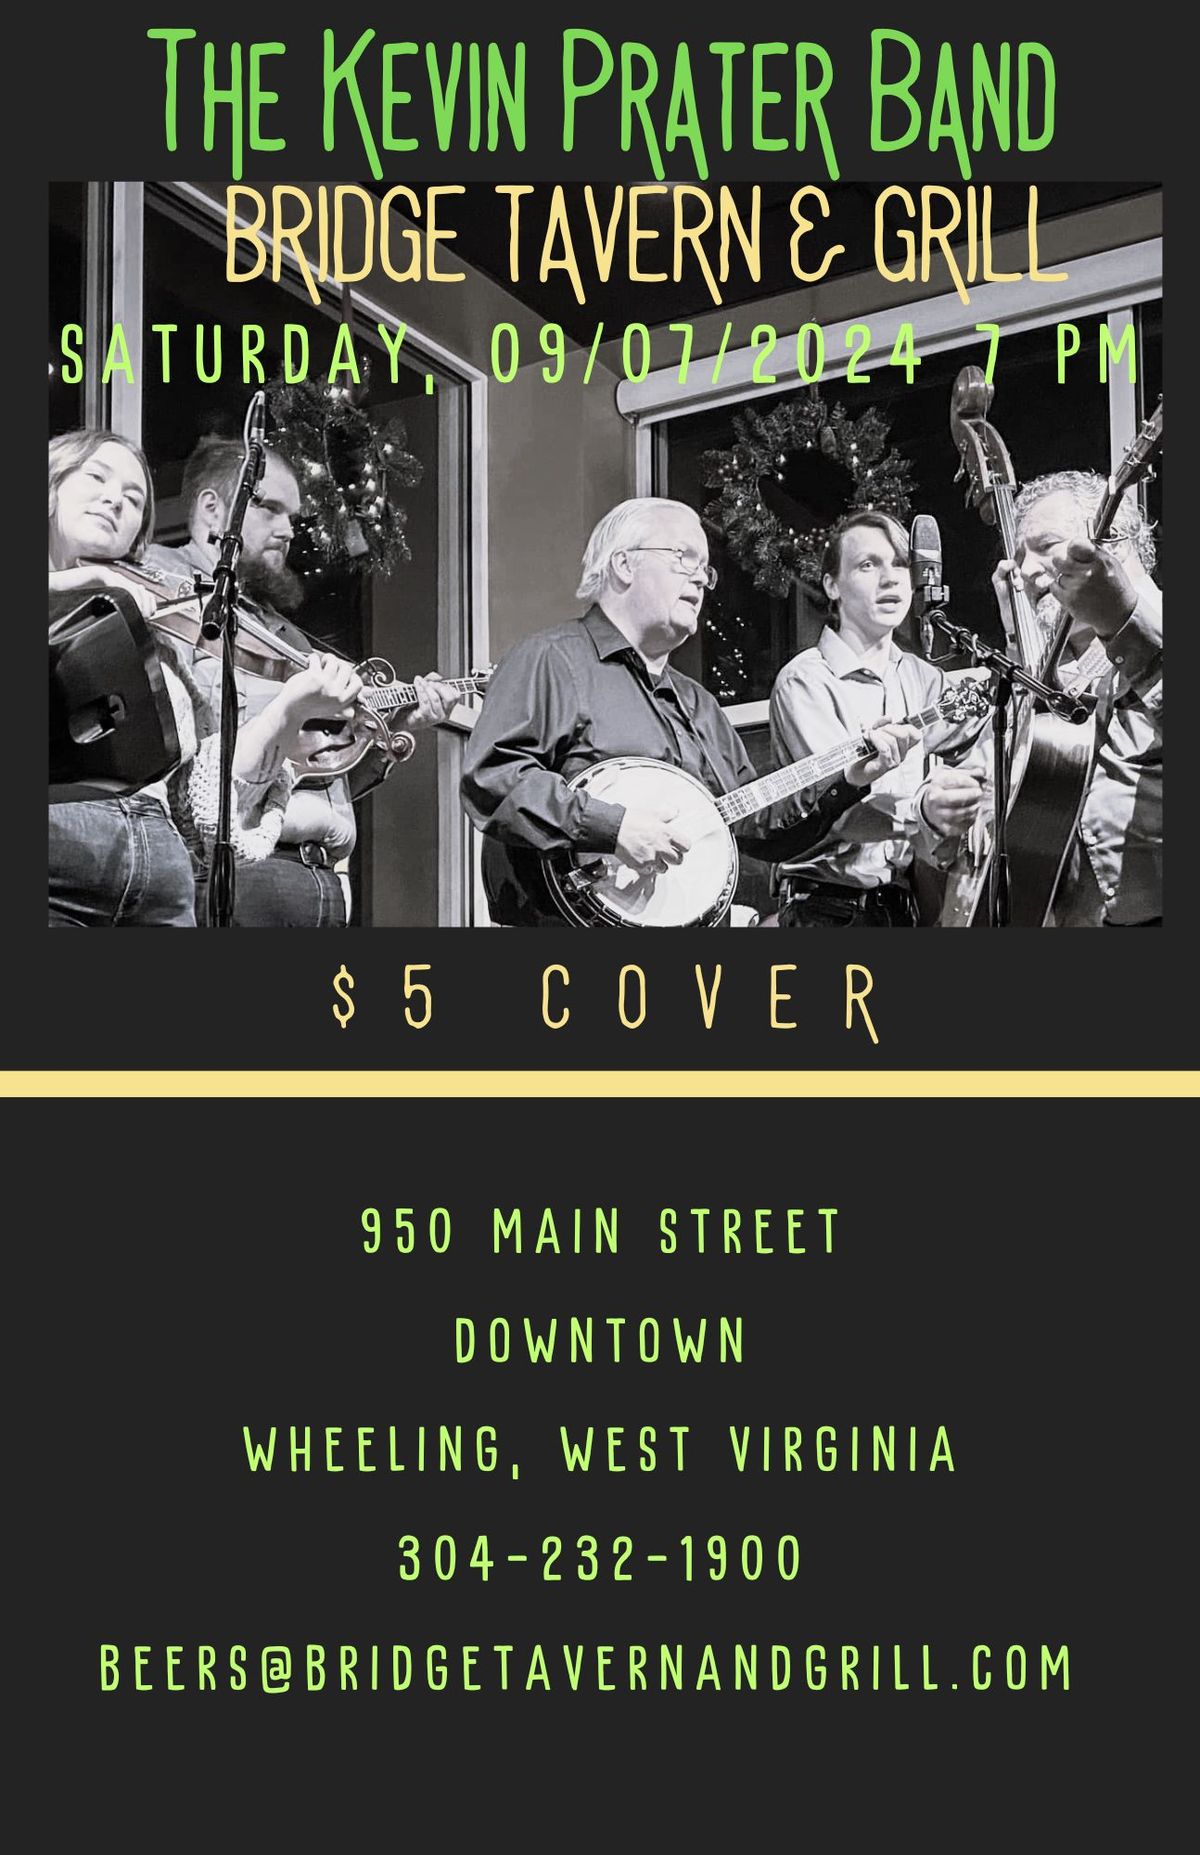 The Kevin Prater Band returns to Bridge Tavern & Gill 